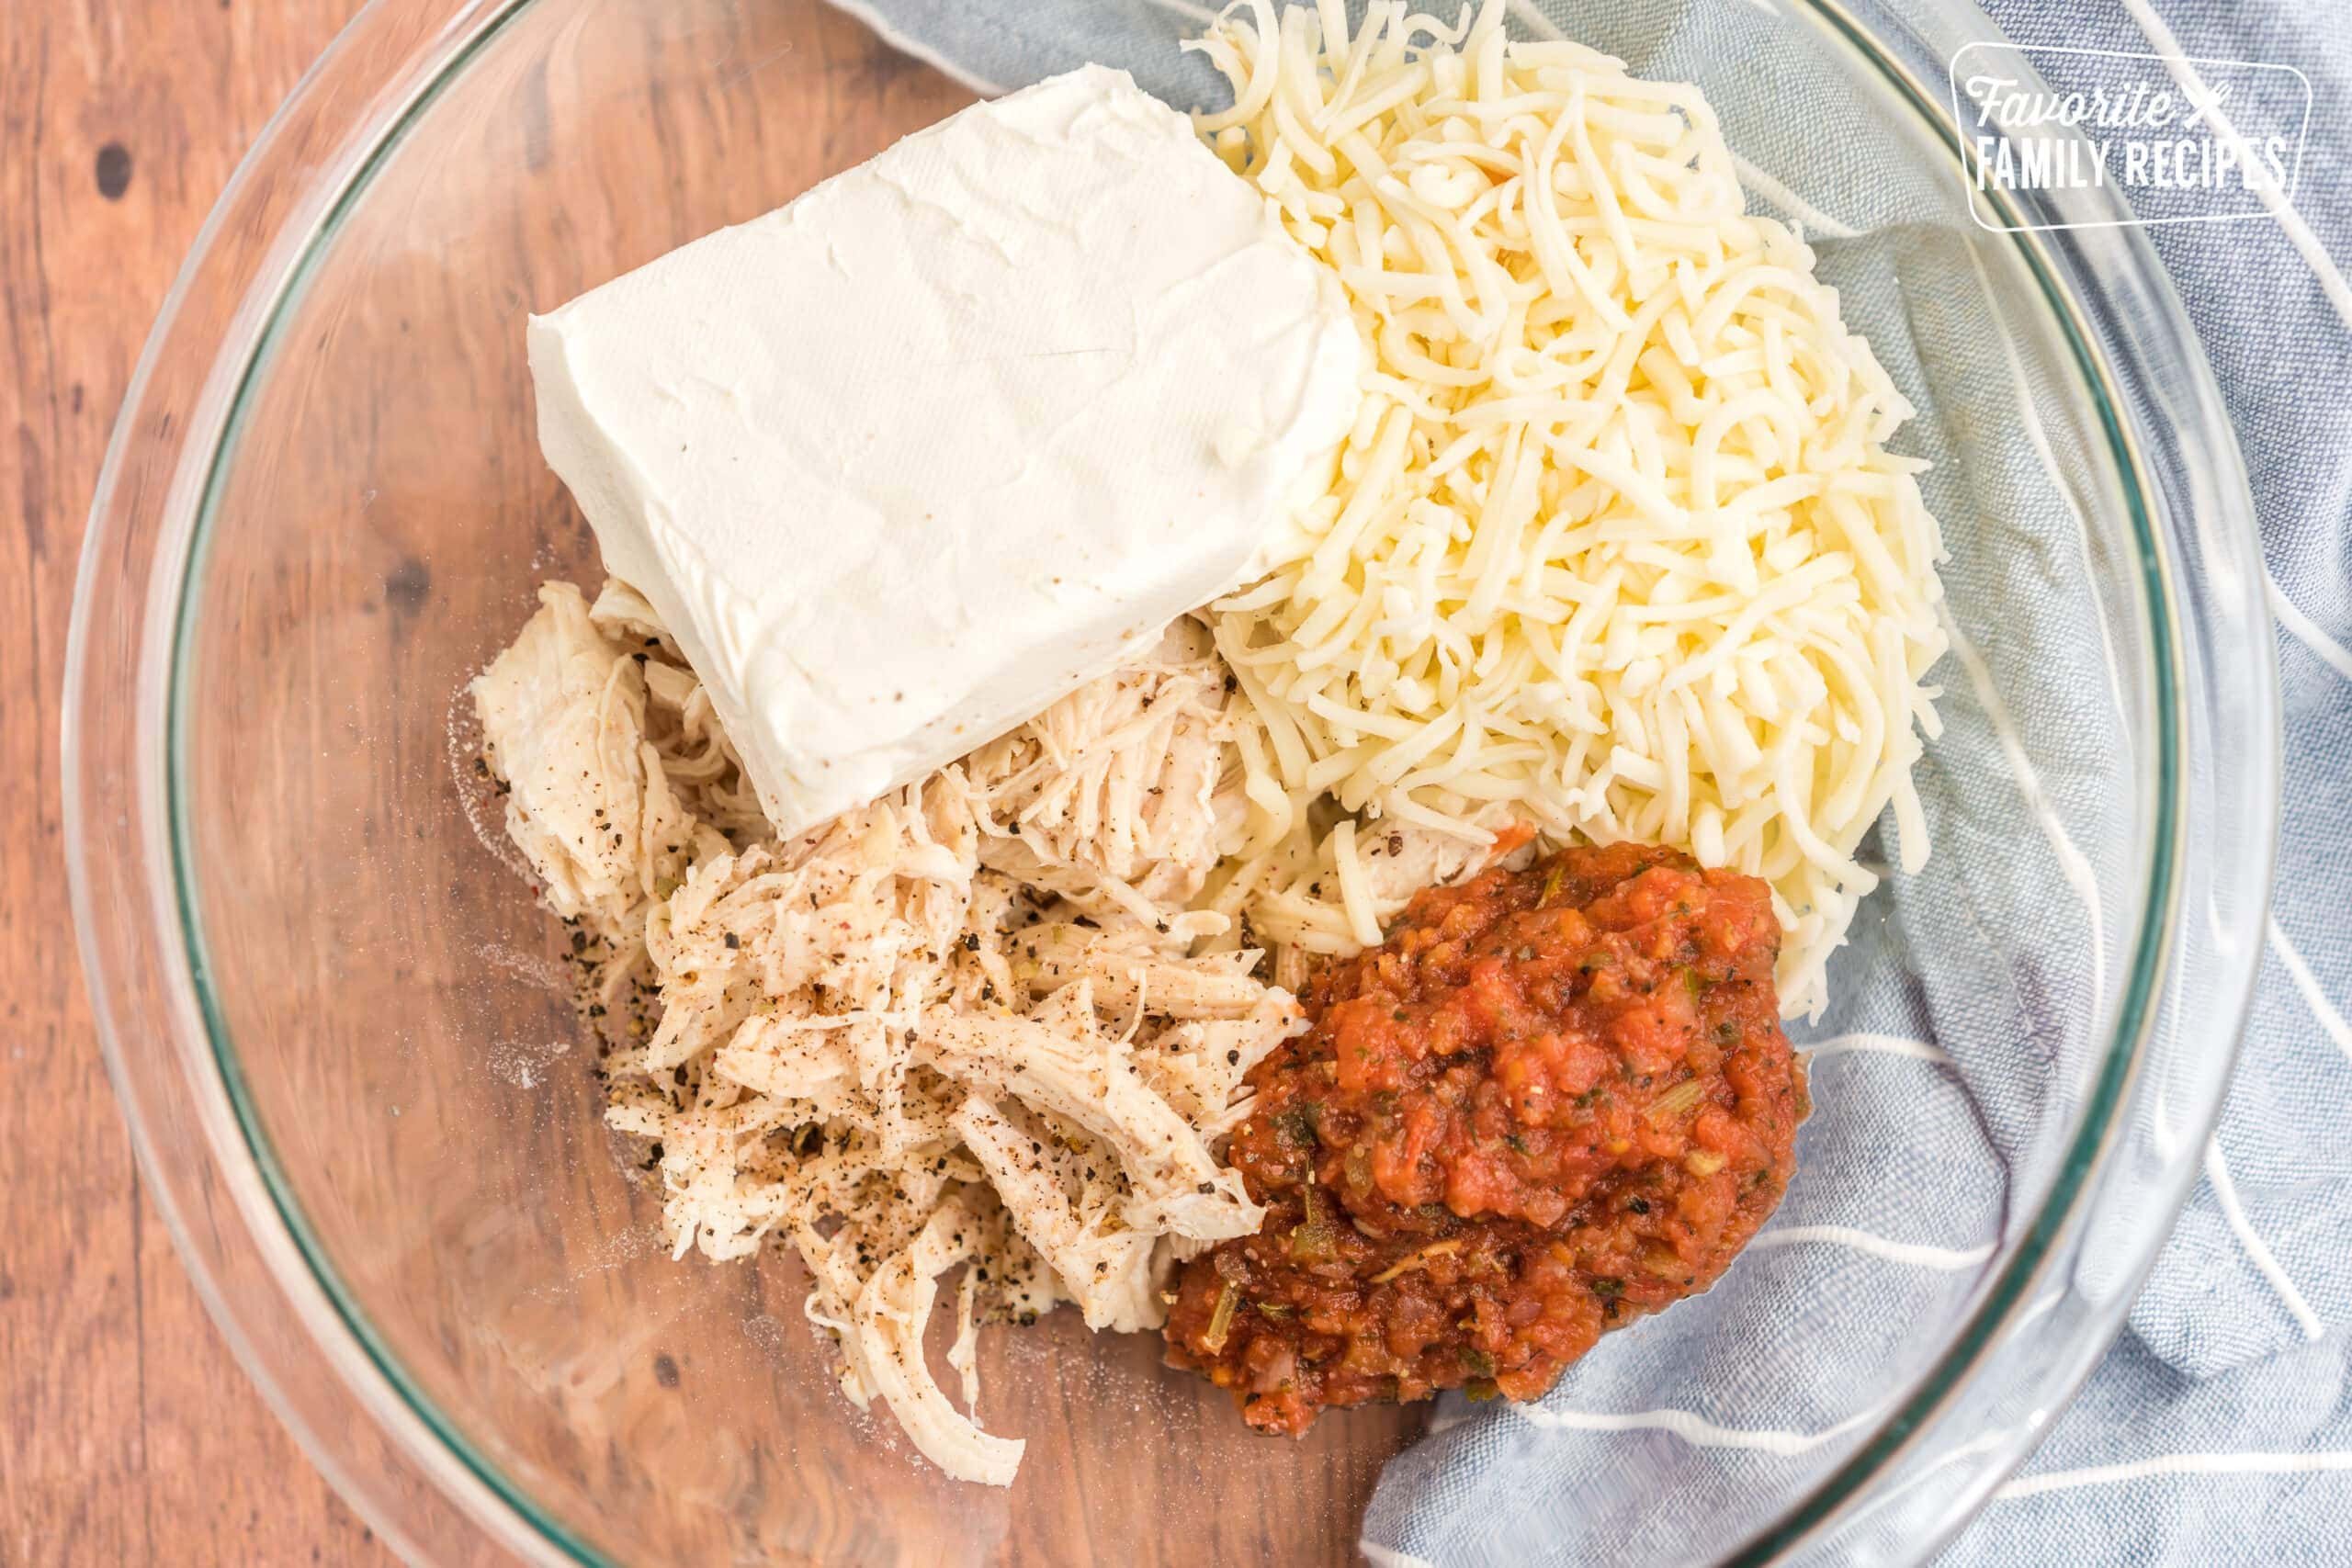 Chicken, cheese, salsa, and sour cream in a bowl